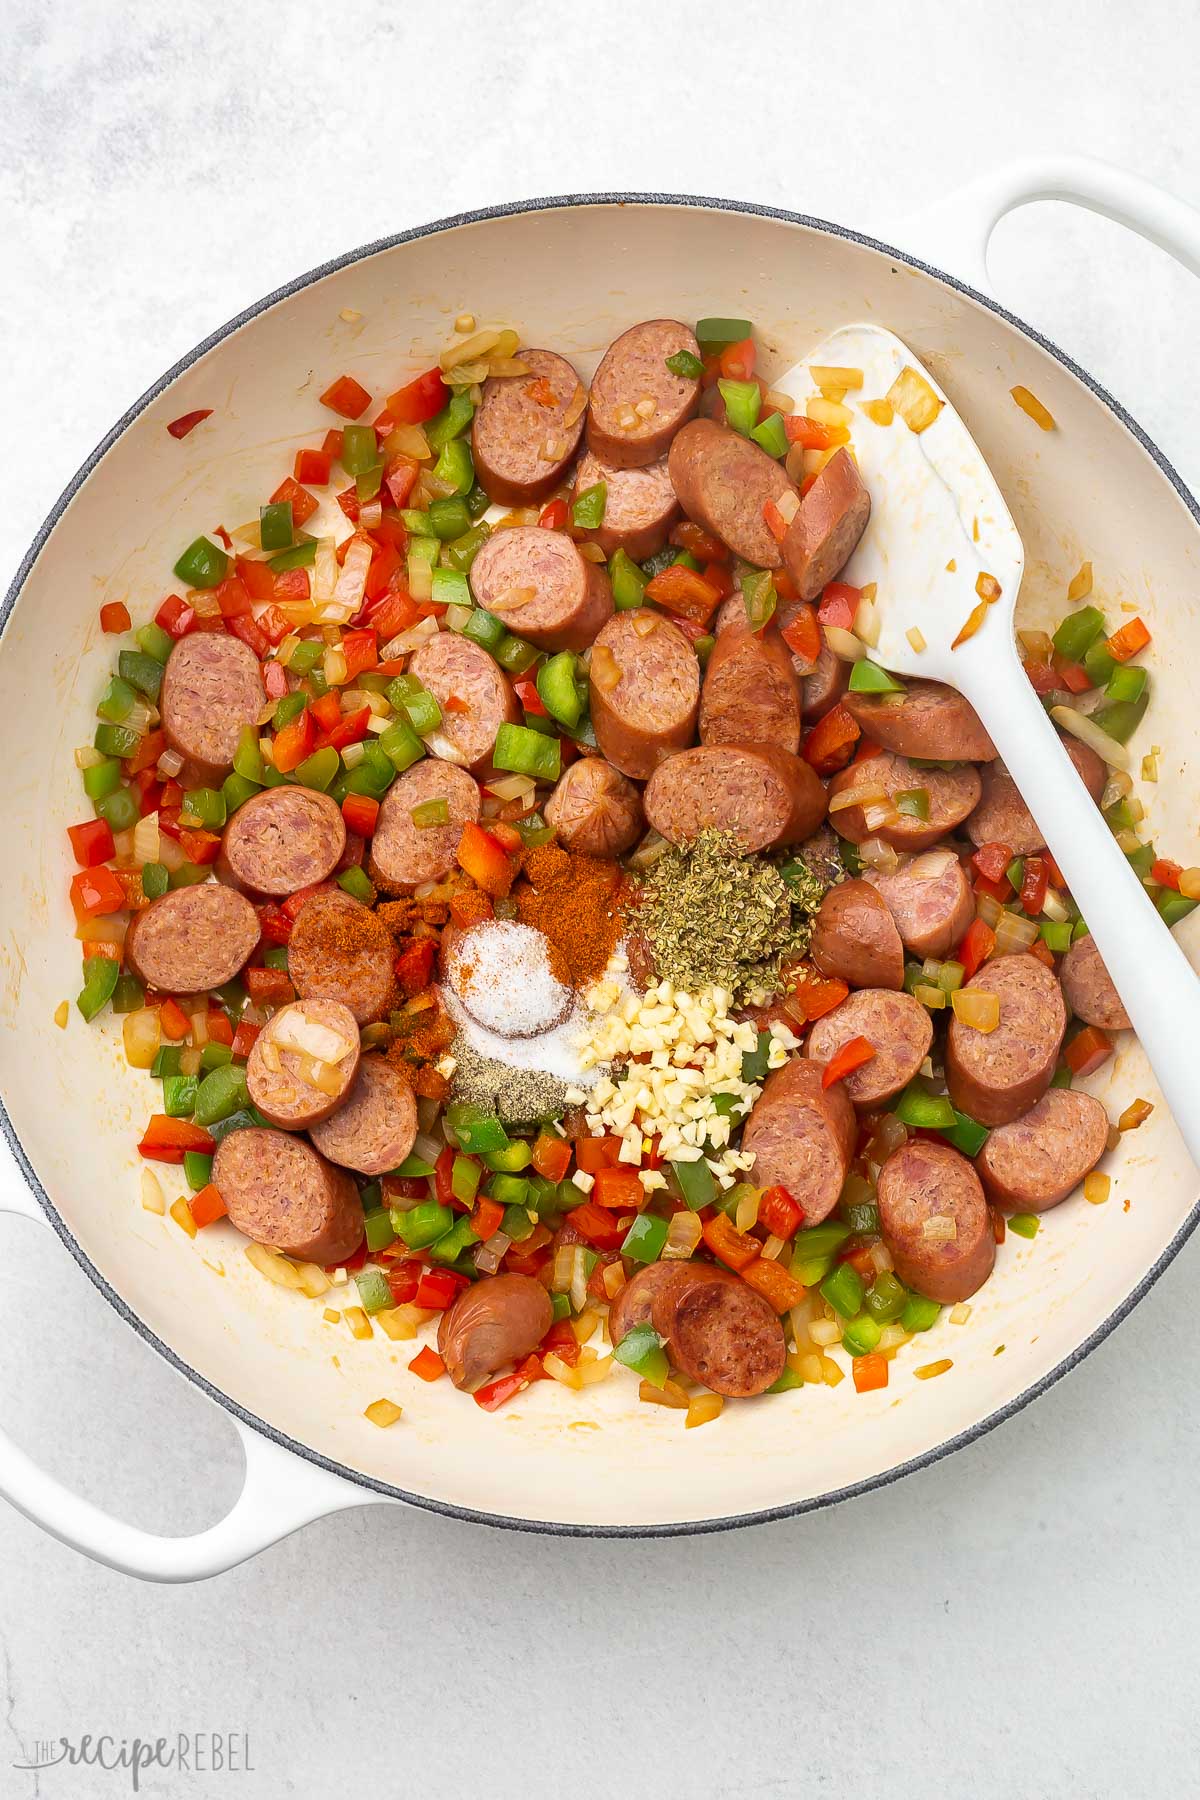 sauteed vegetables, sausage and spices in white pot.